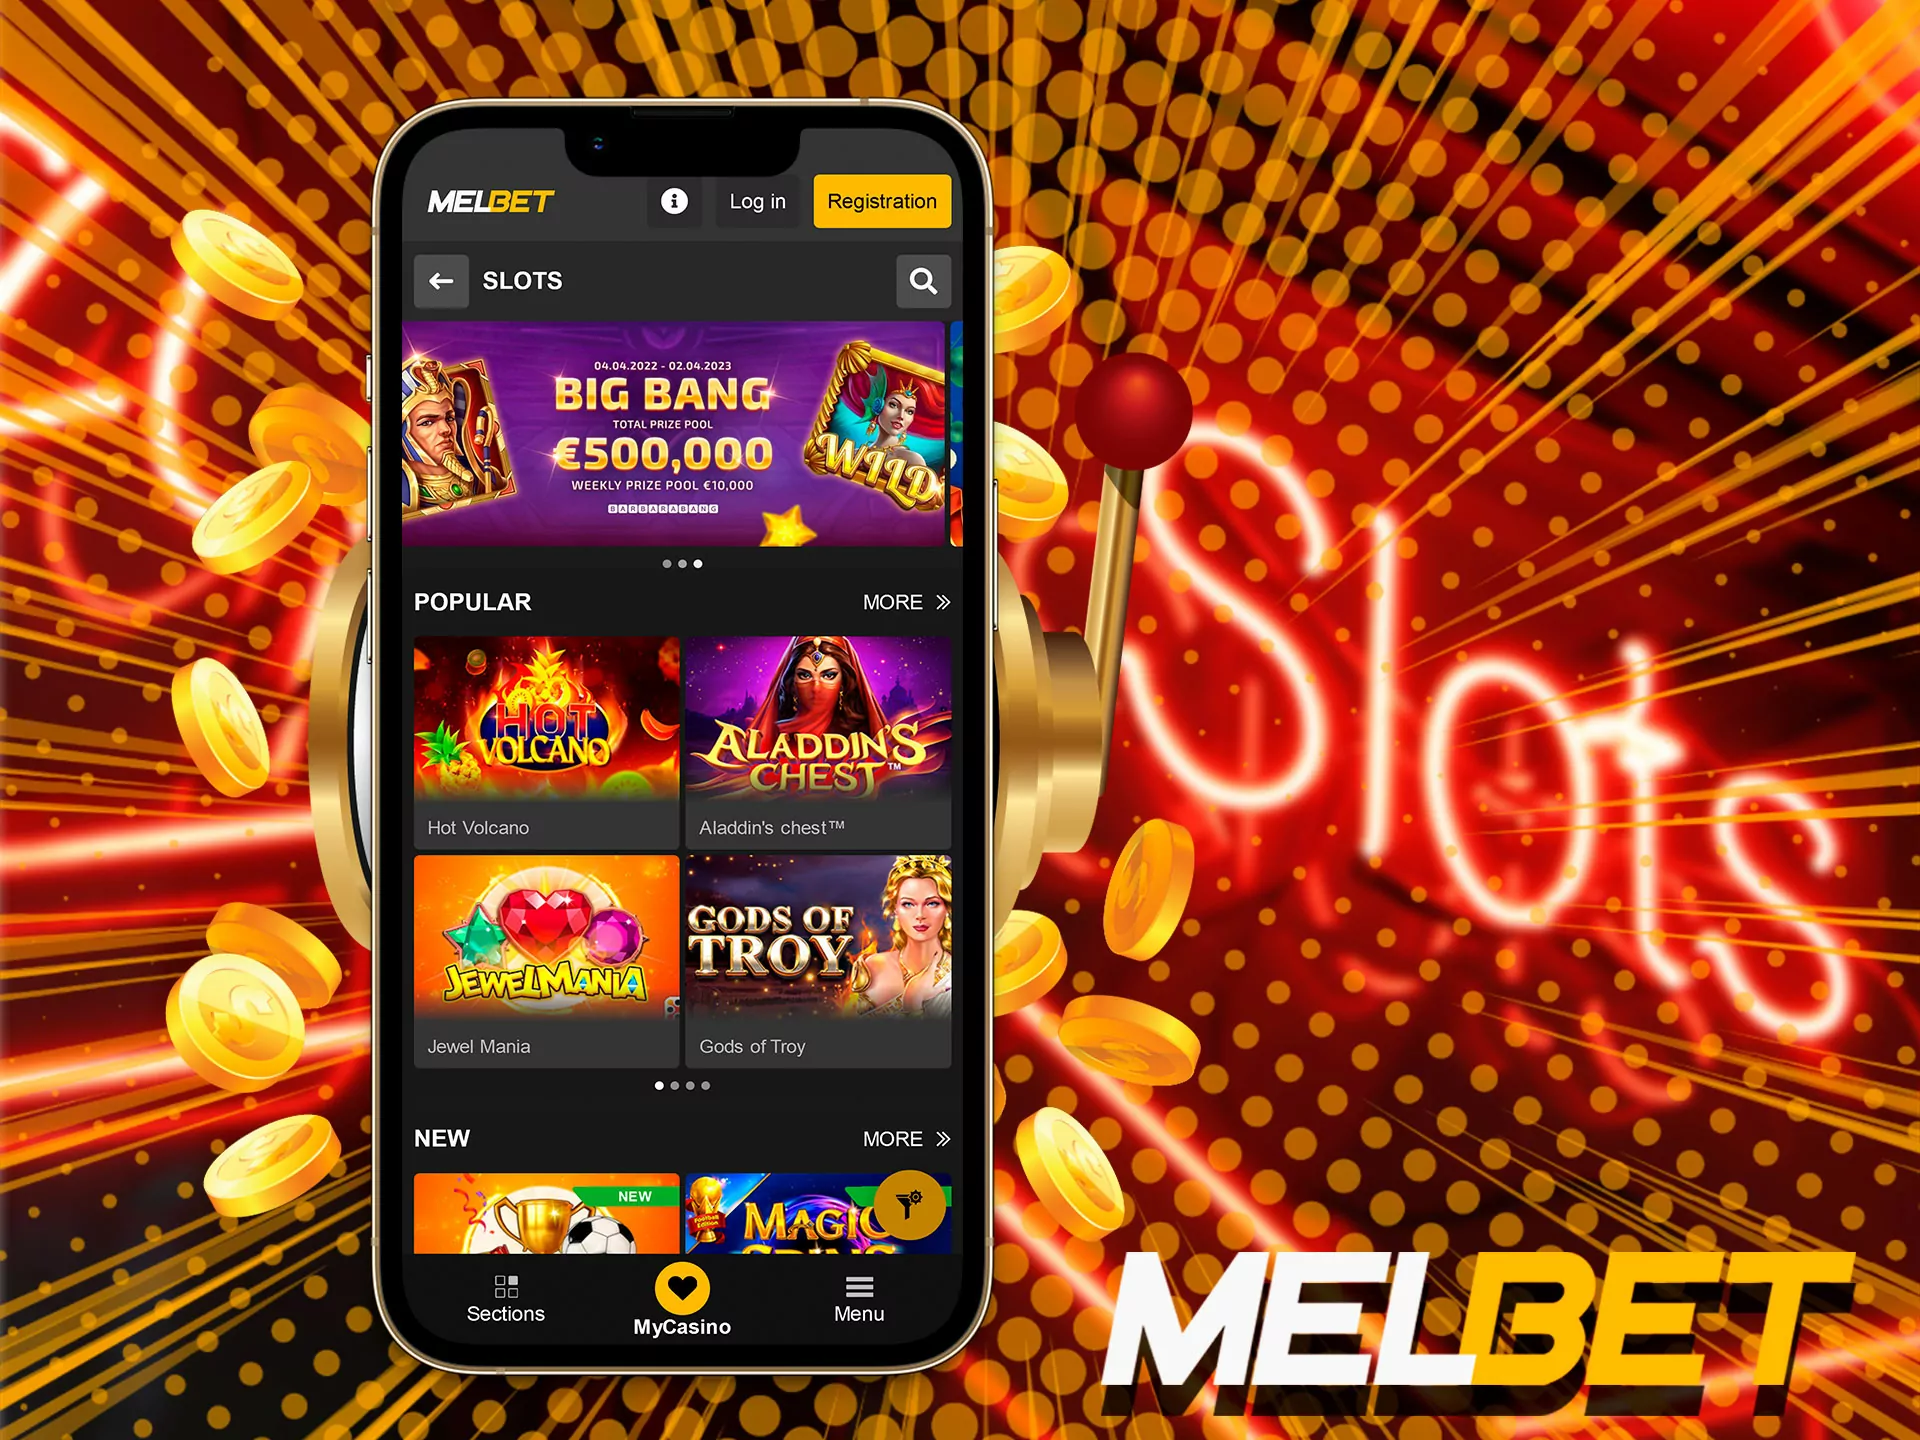 A fairly popular game among users from Bangladesh, a huge selection of slots: classic slots, and unique options with 7 reels are all available at Melbet casino slots.